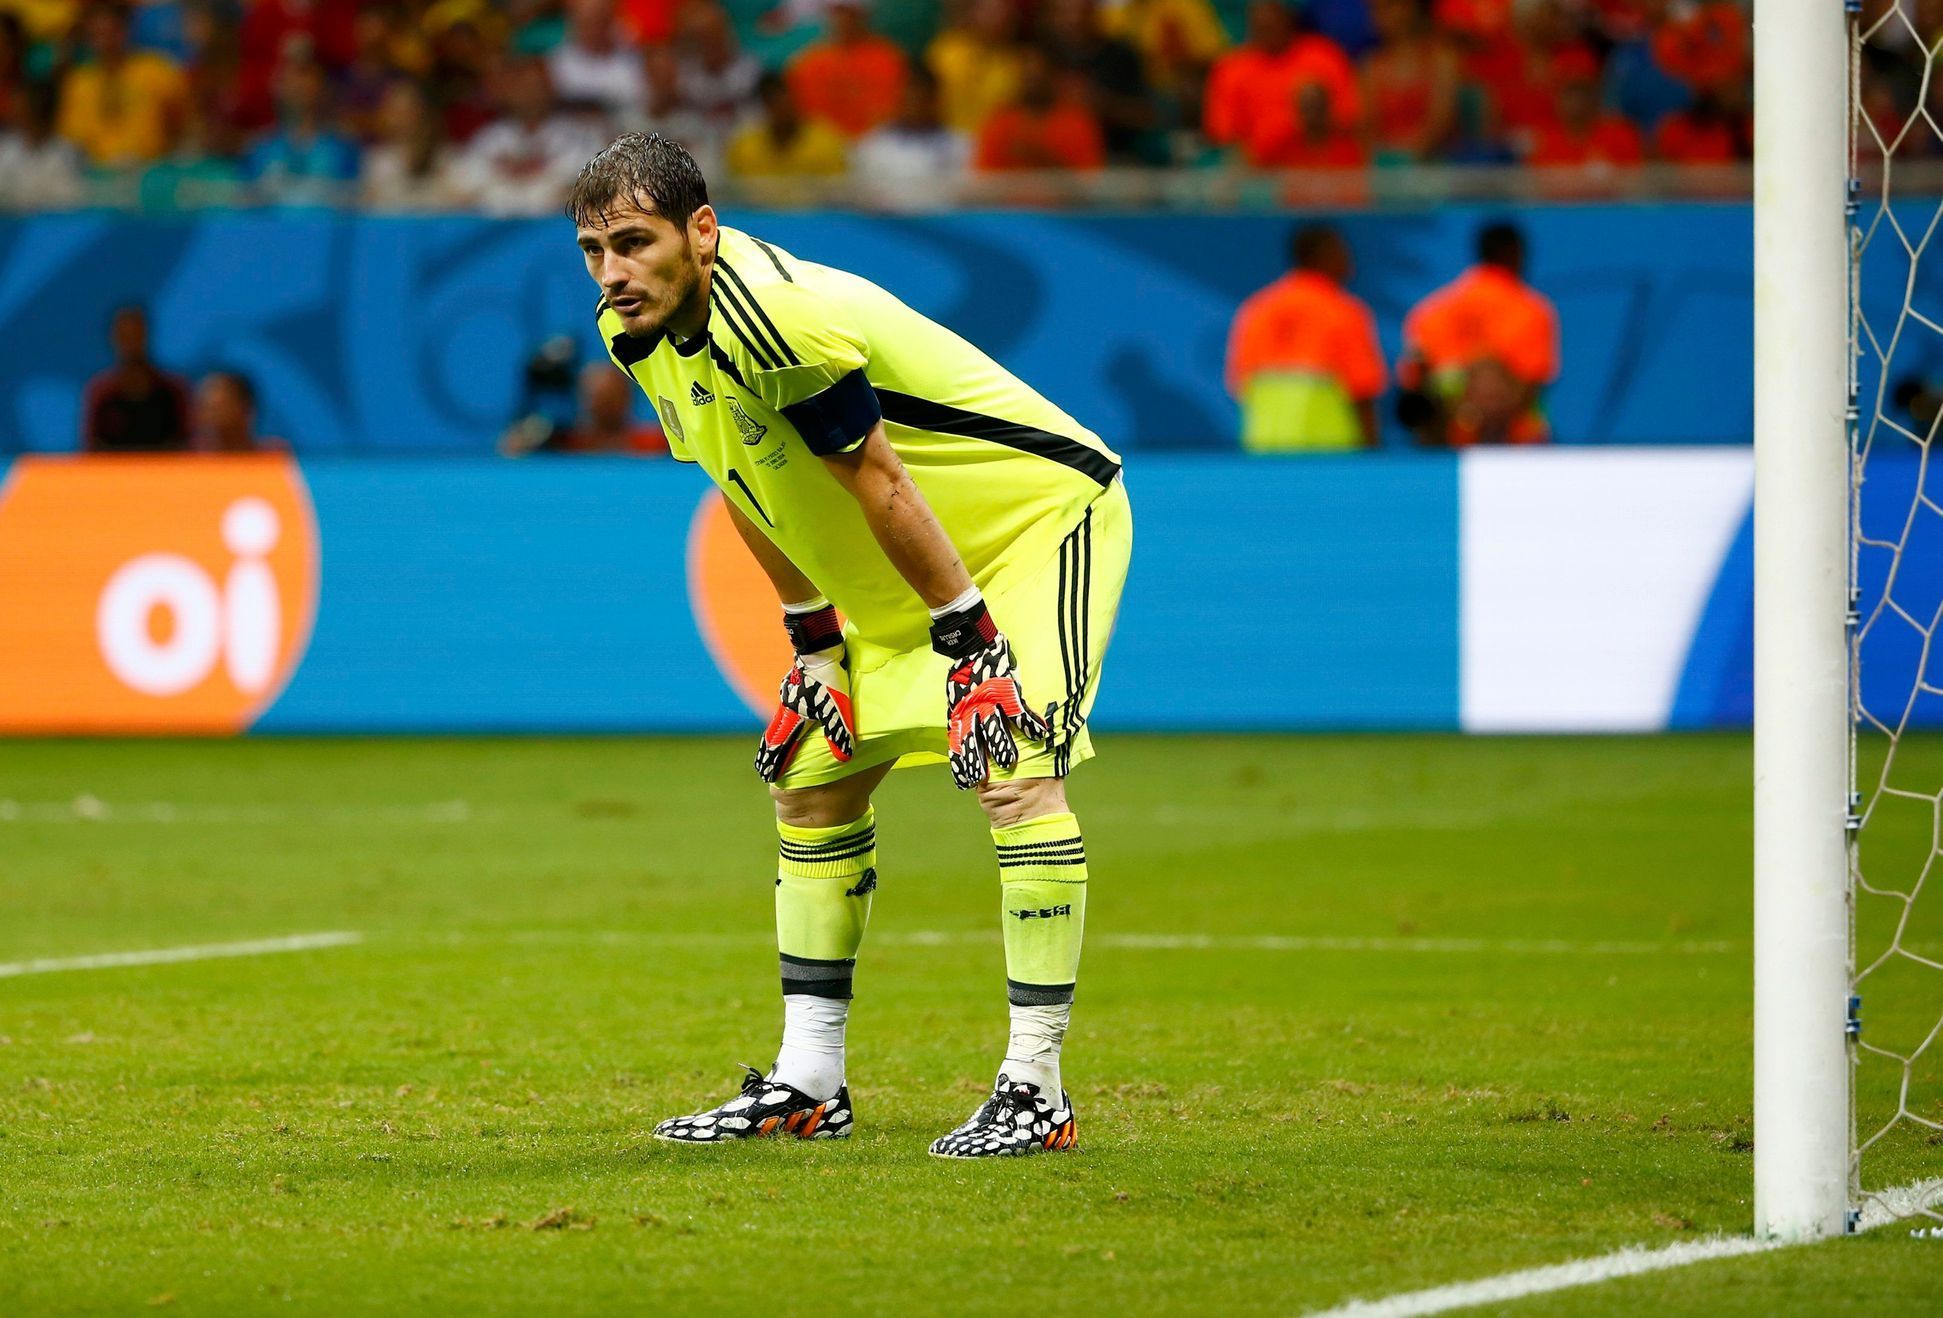 Spain's Casillas reacts after conceding a goal from the Netherlands during their 2014 World Cup Group B soccer match at the Fonte Nova arena in Salvador